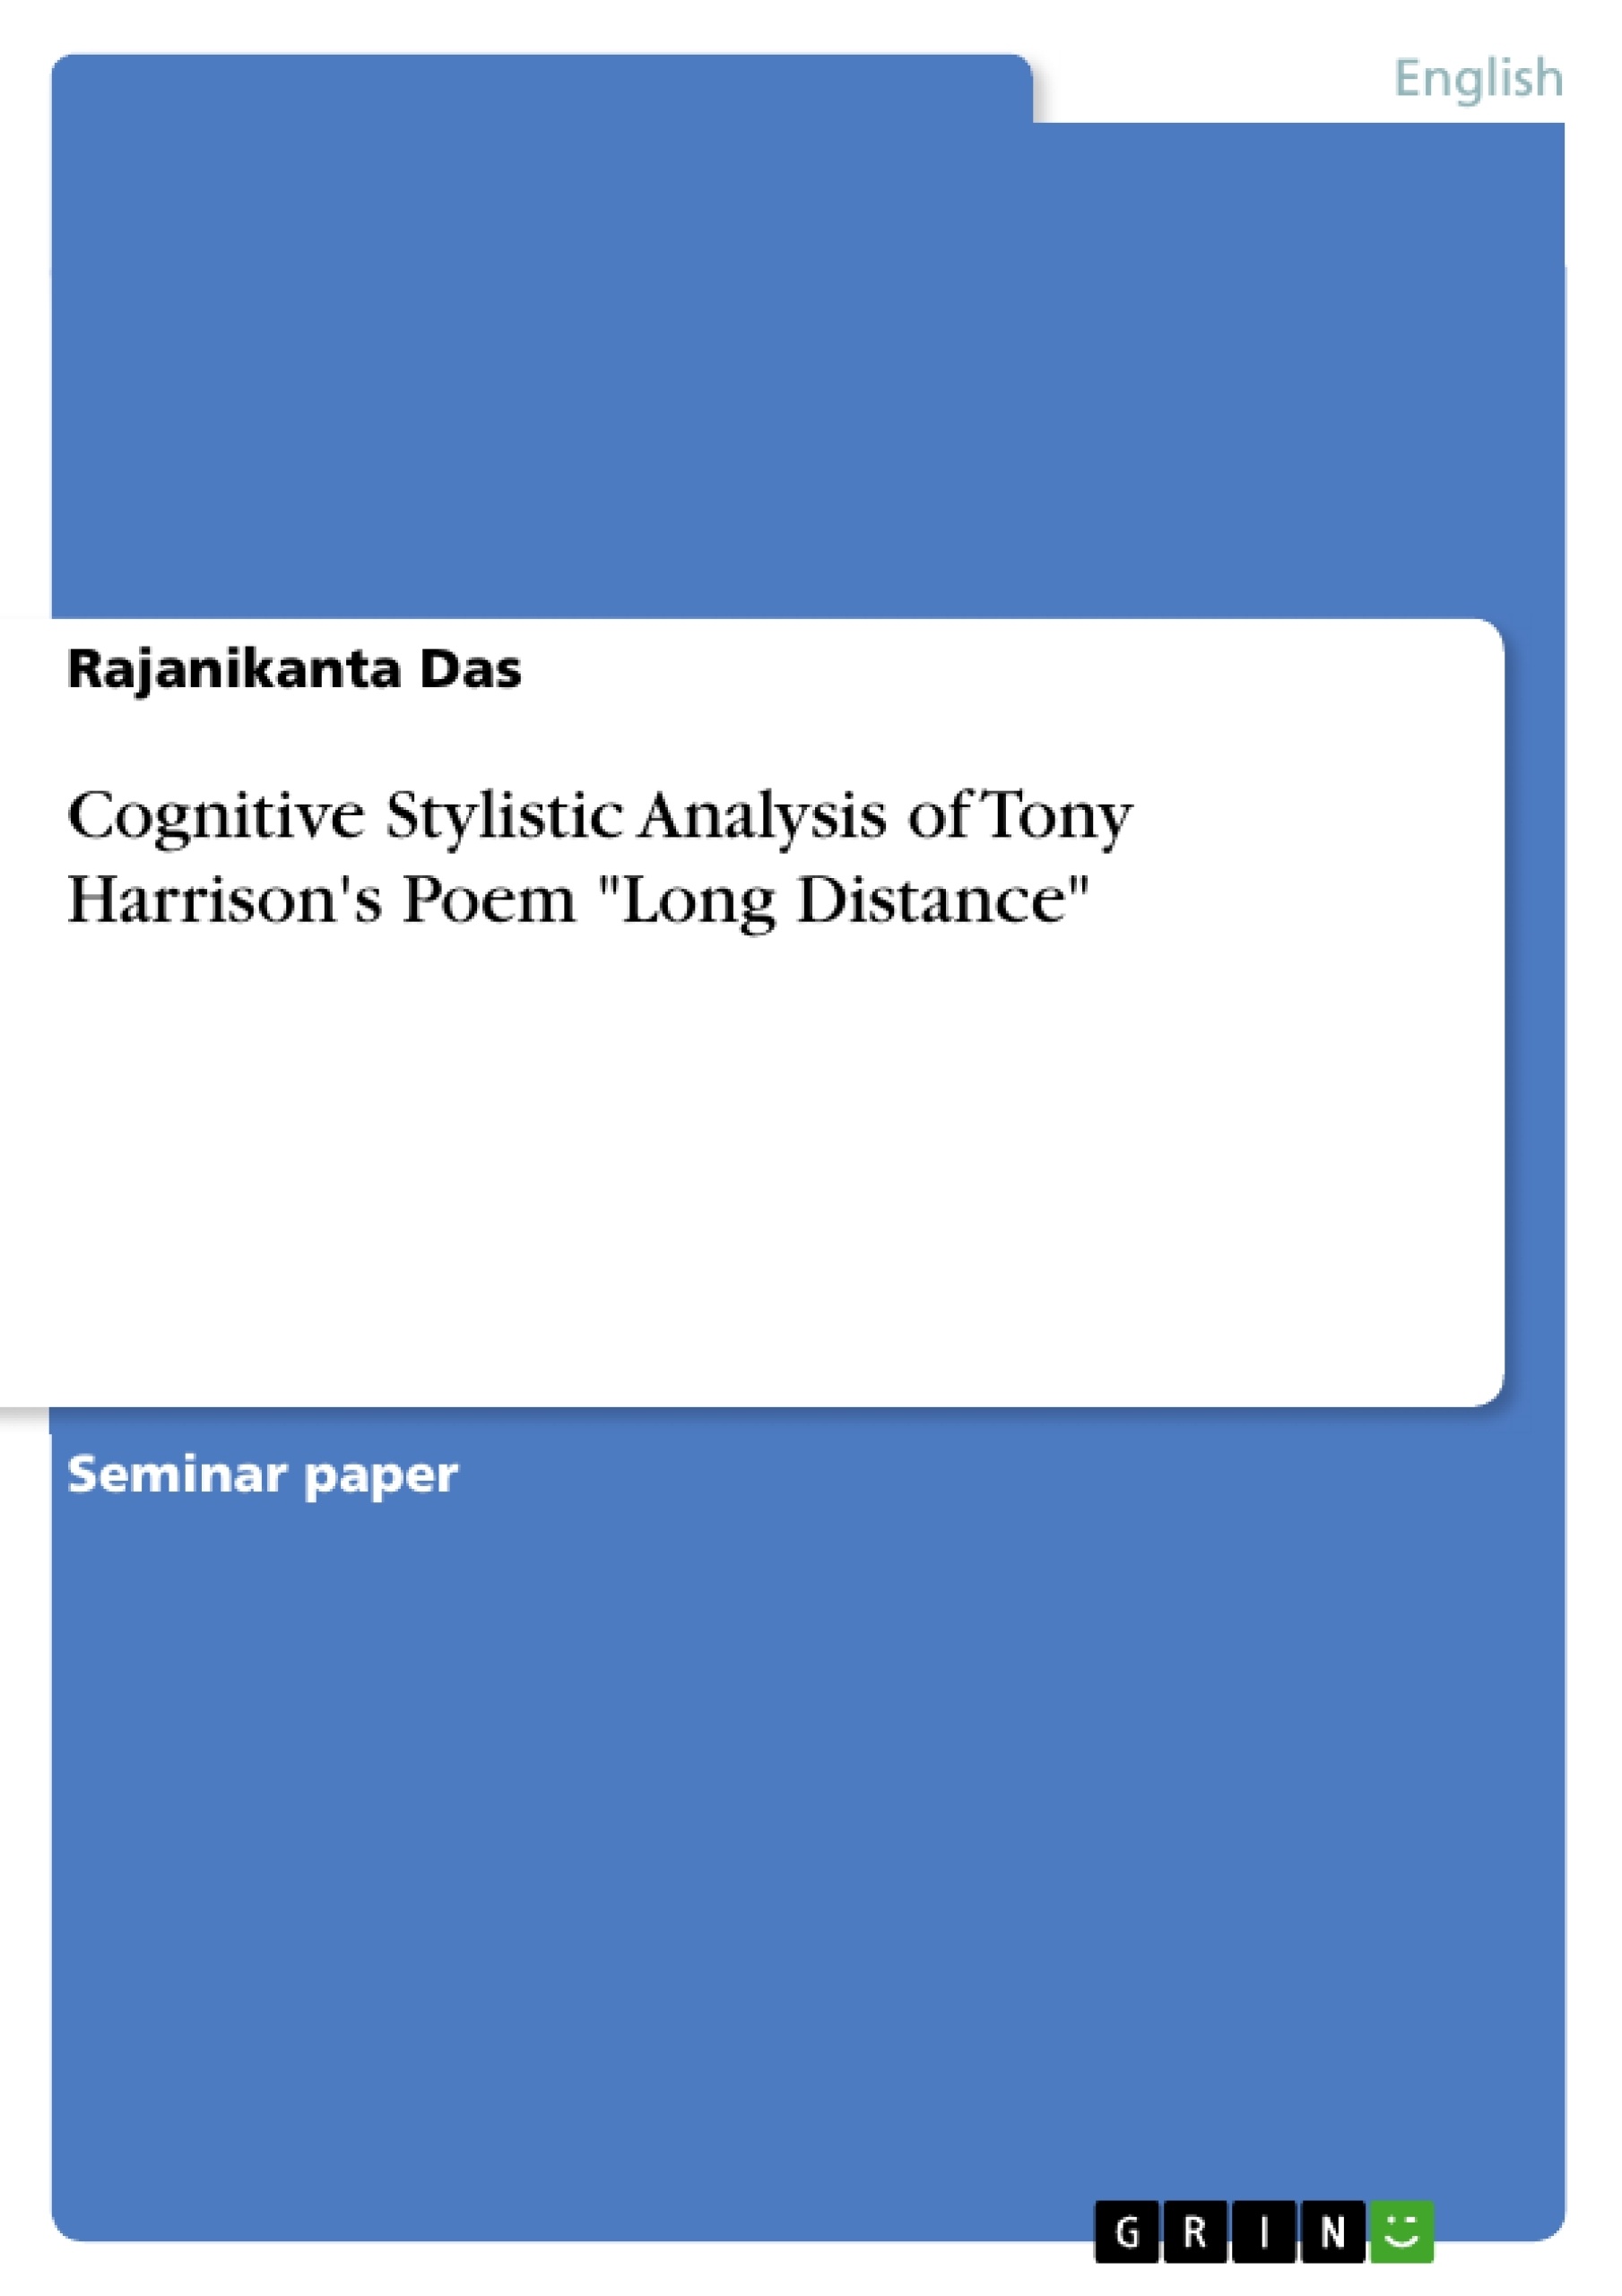 Título: Cognitive Stylistic Analysis of Tony Harrison's Poem "Long Distance"